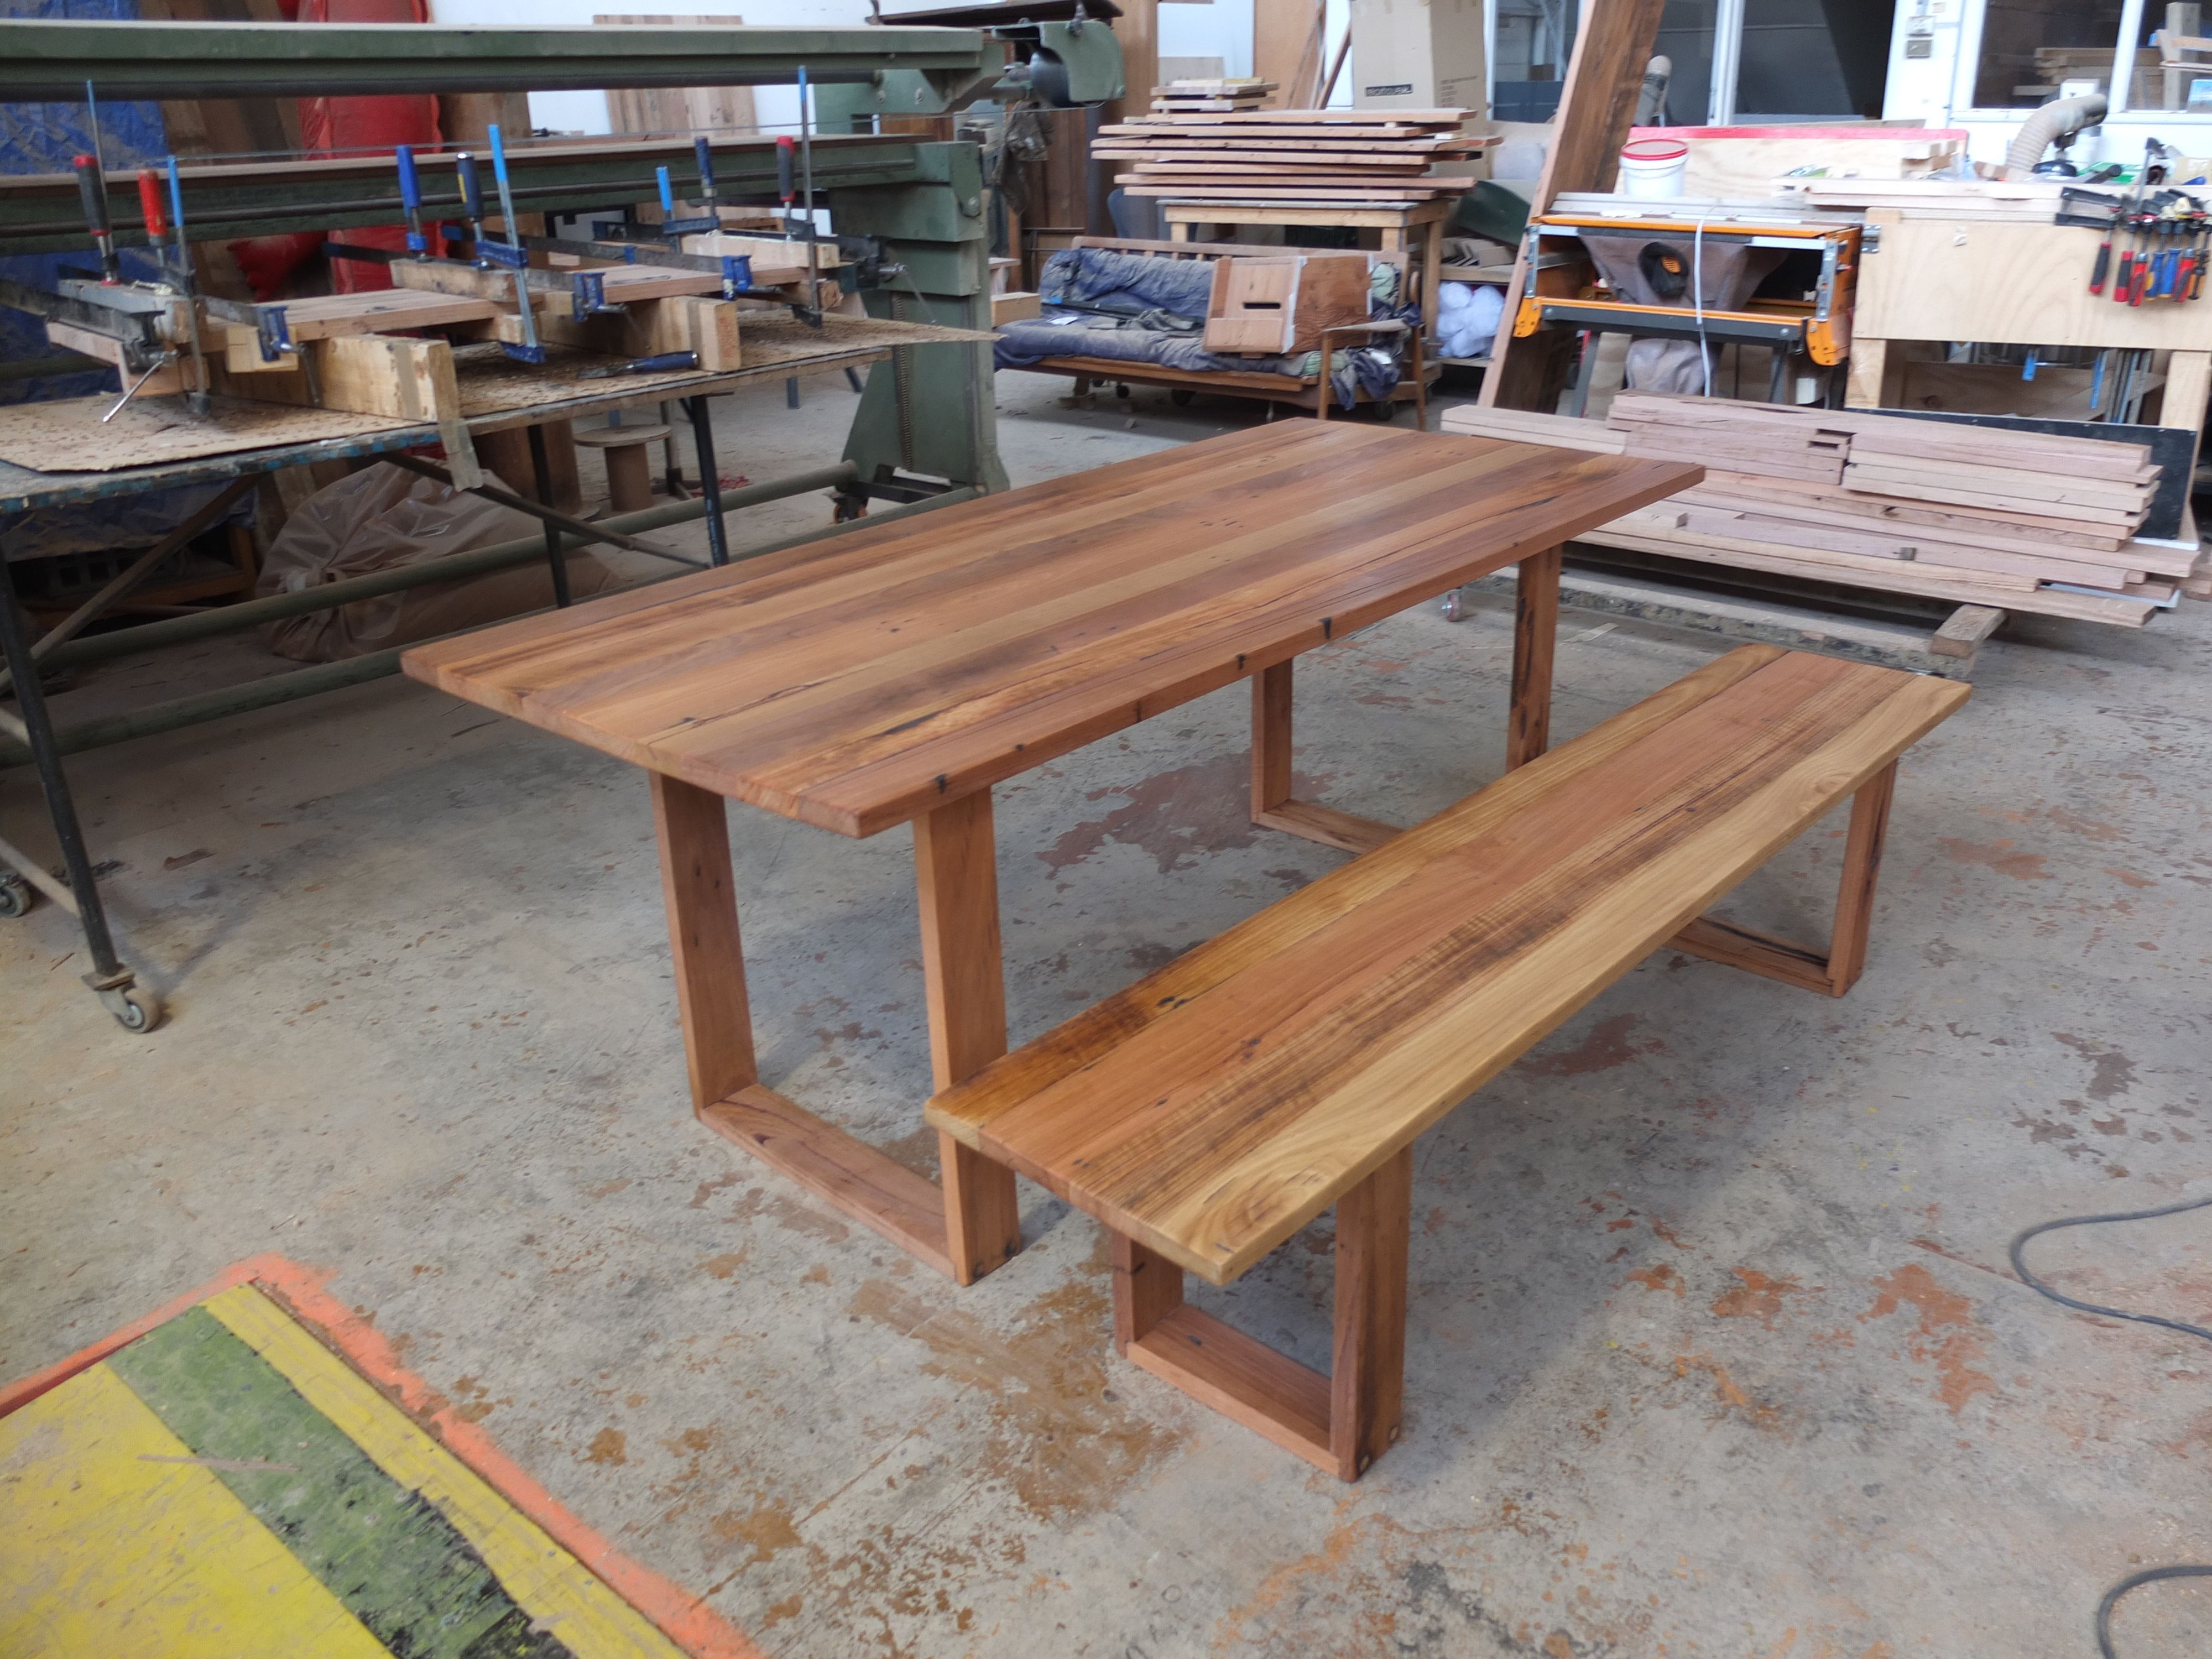 Recent recycled timber tables, made to order | Tim T Design